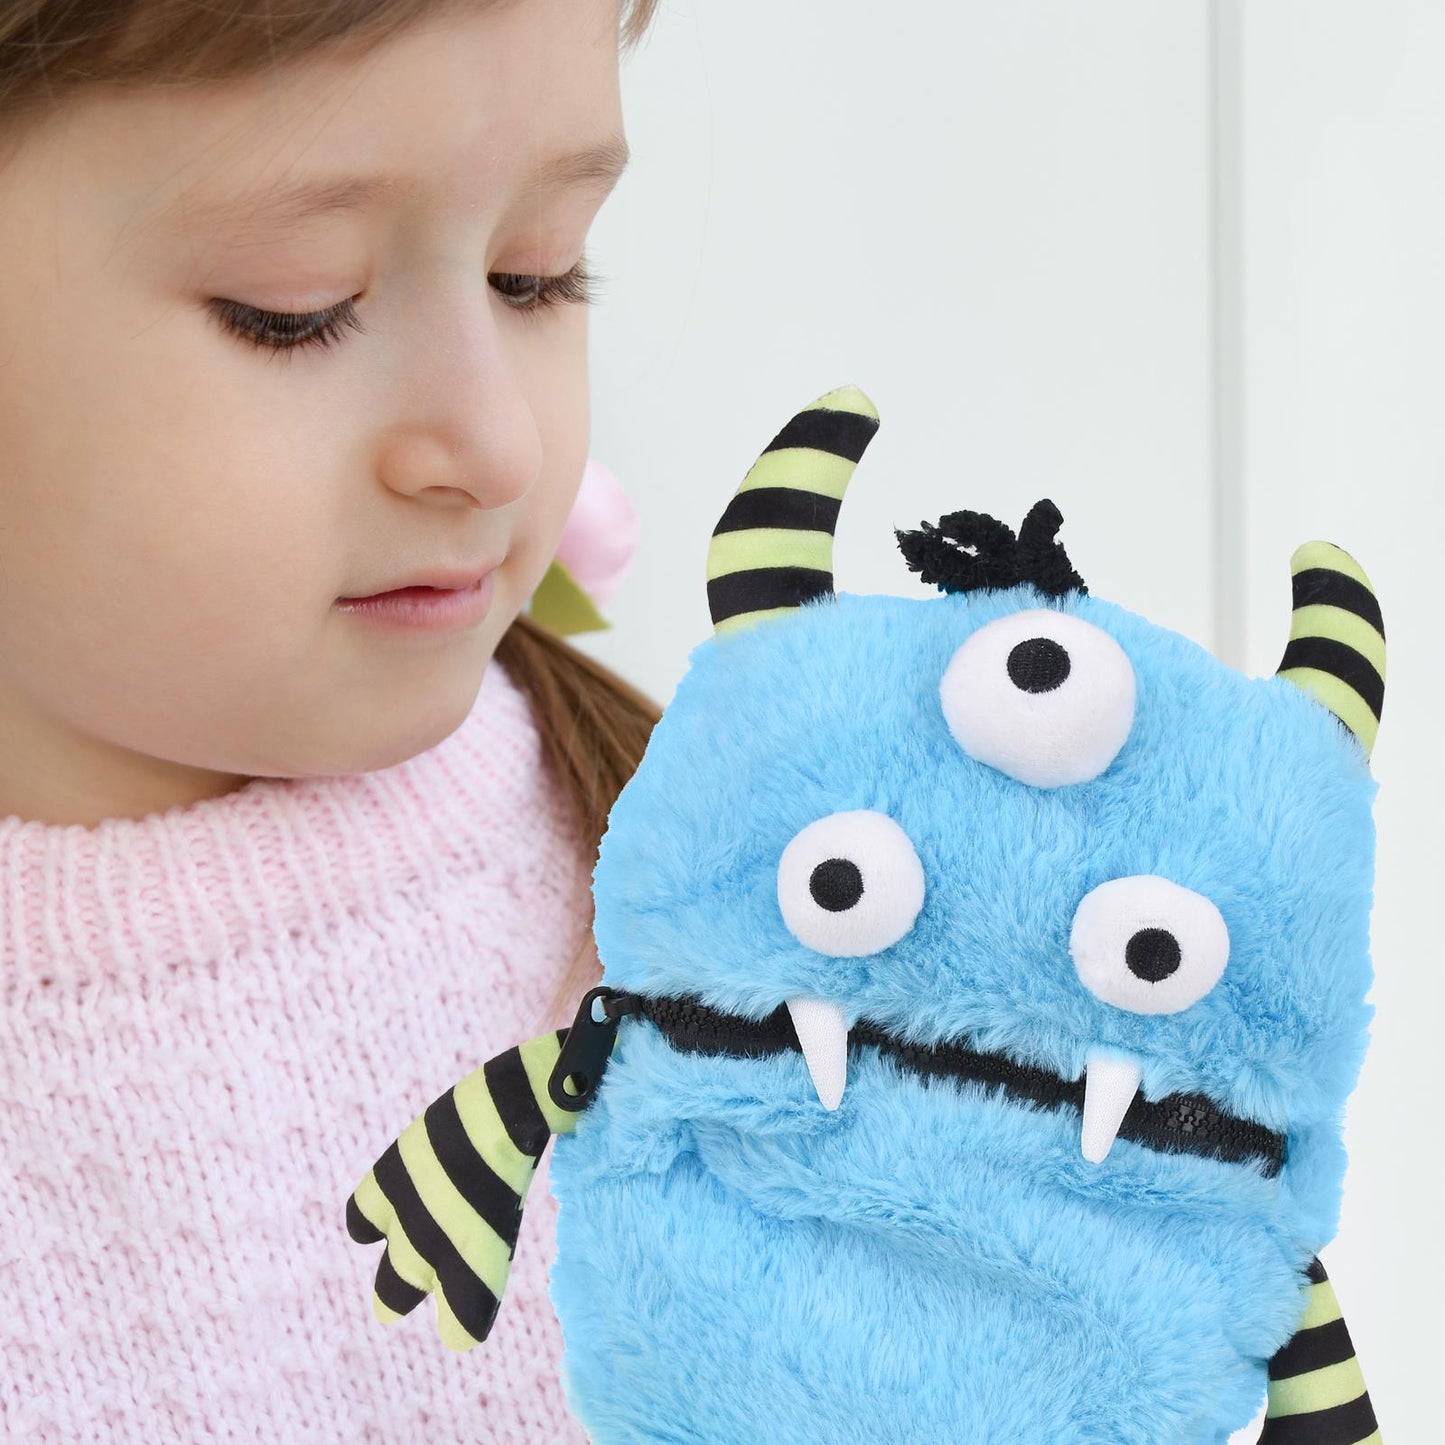 Plush Monsters for Anxiety and Stress Relief